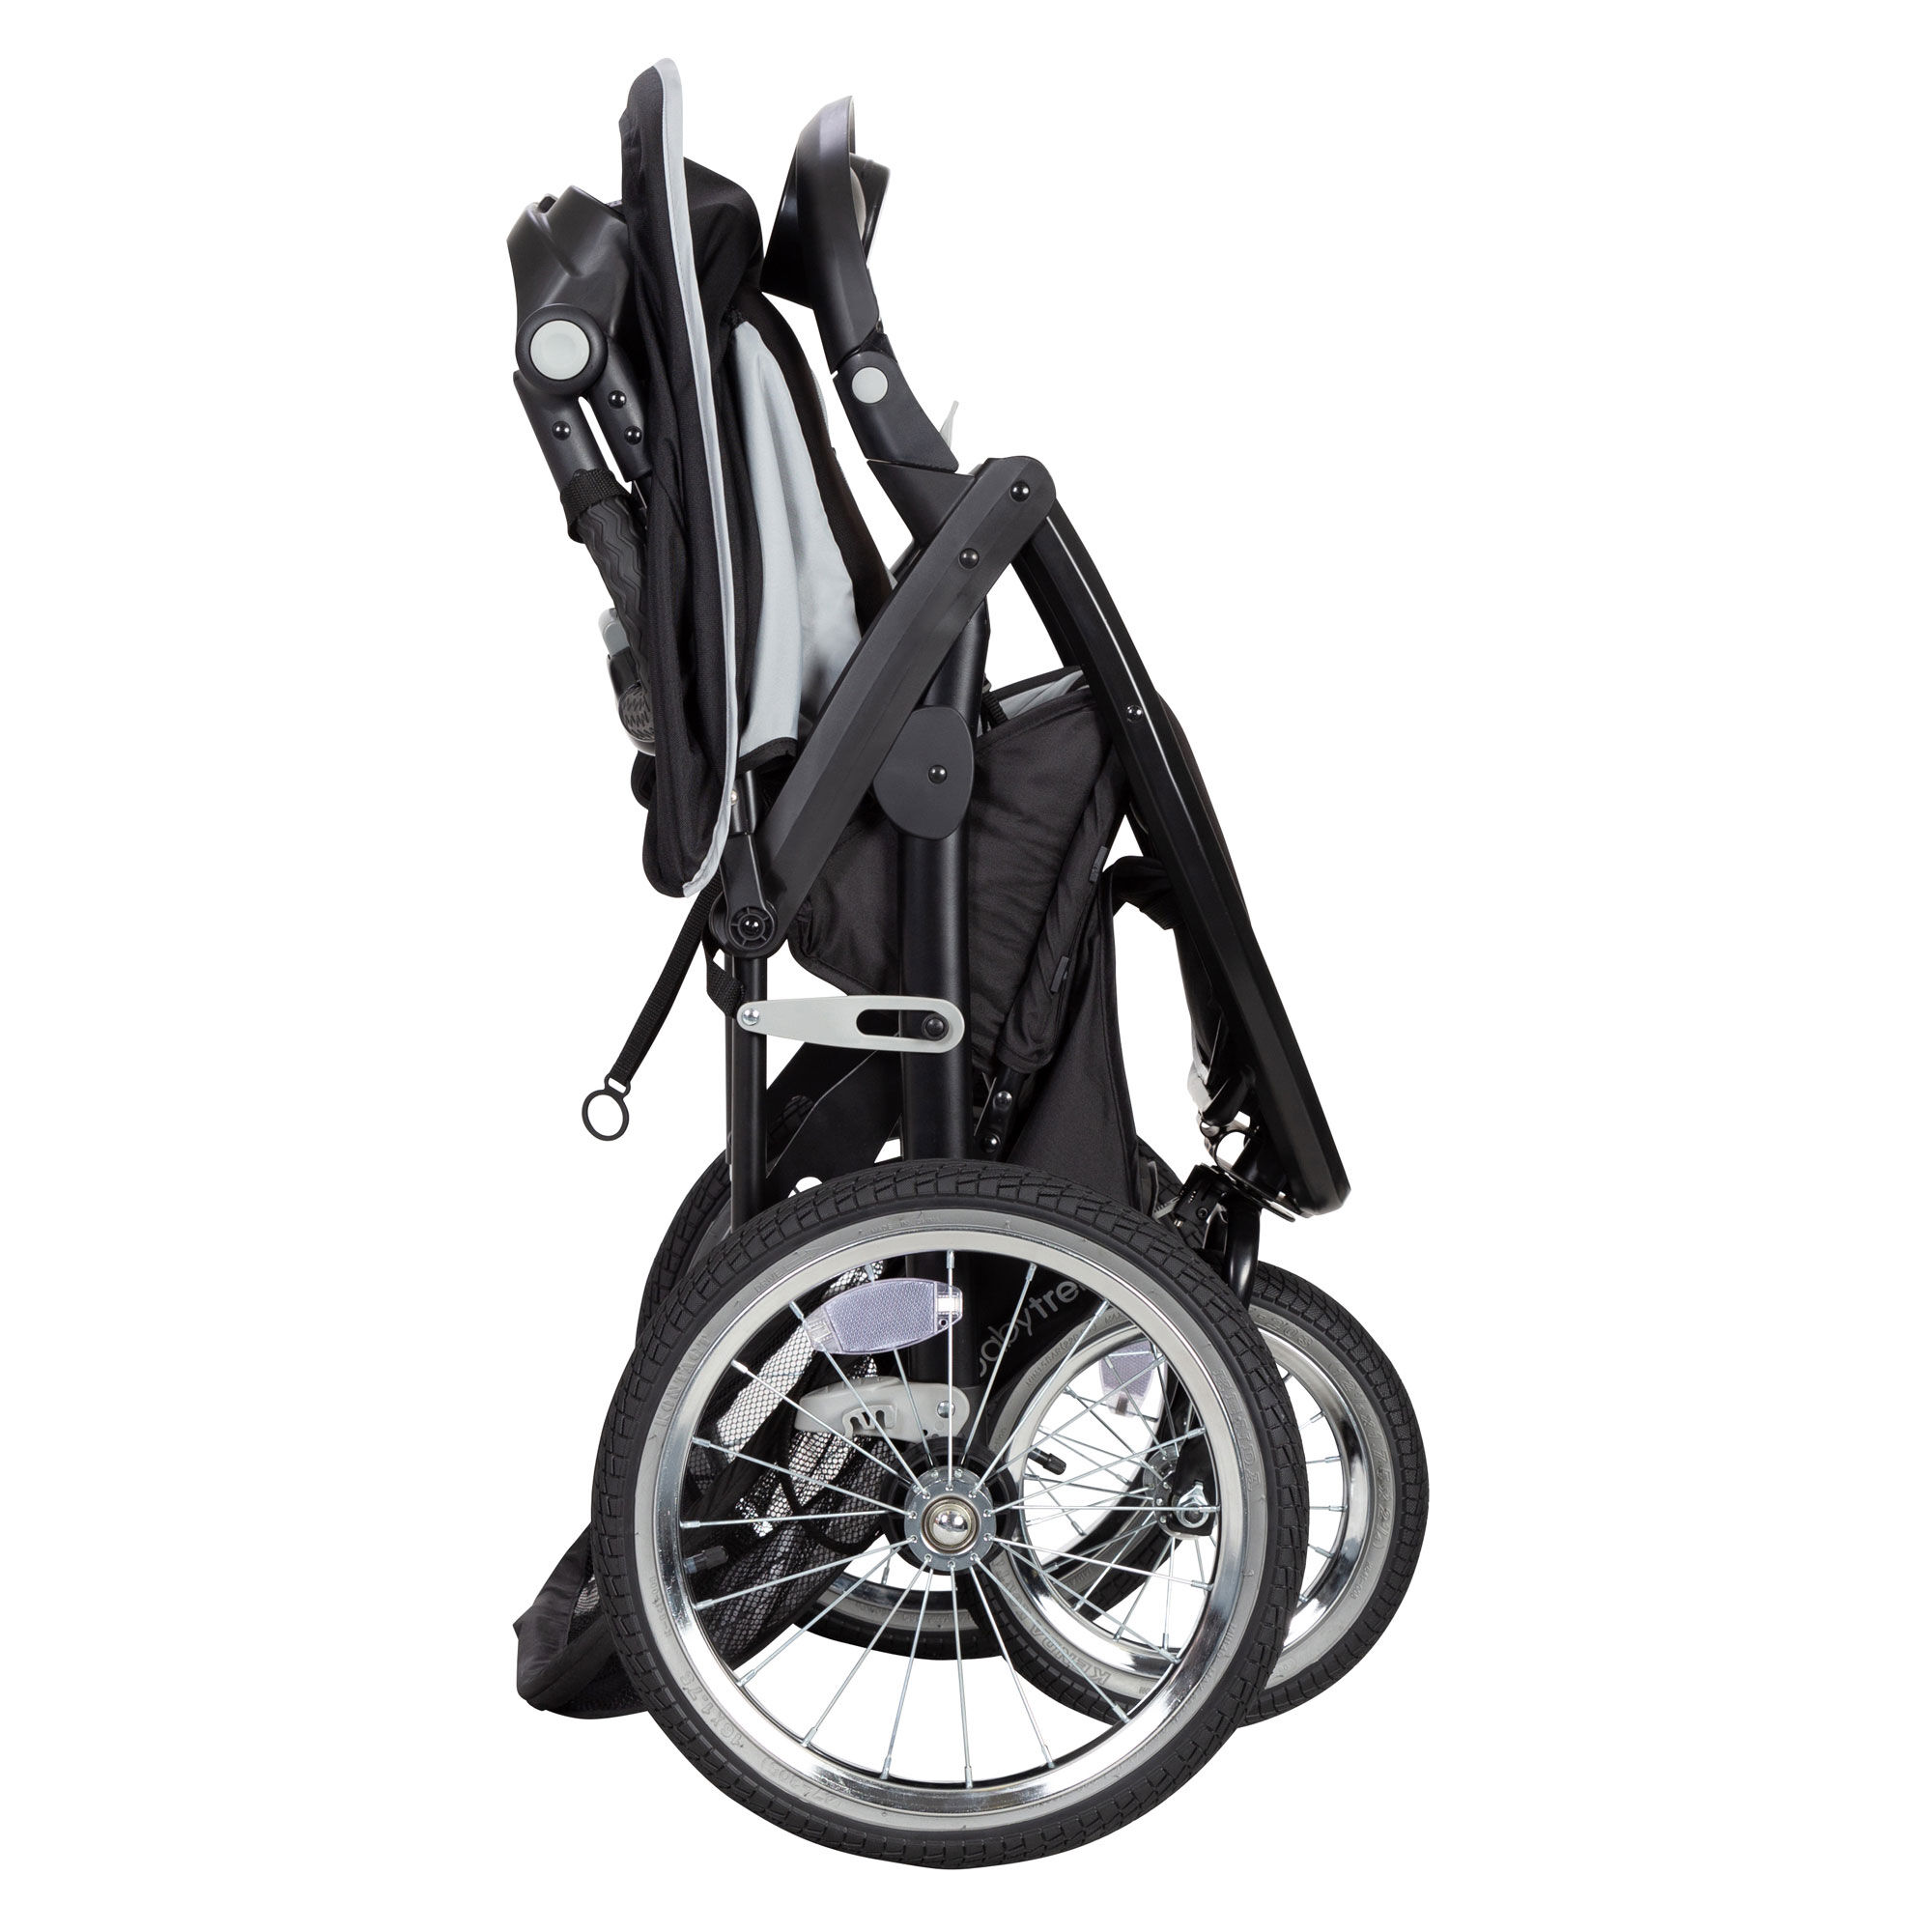 baby trend expedition travel system reviews